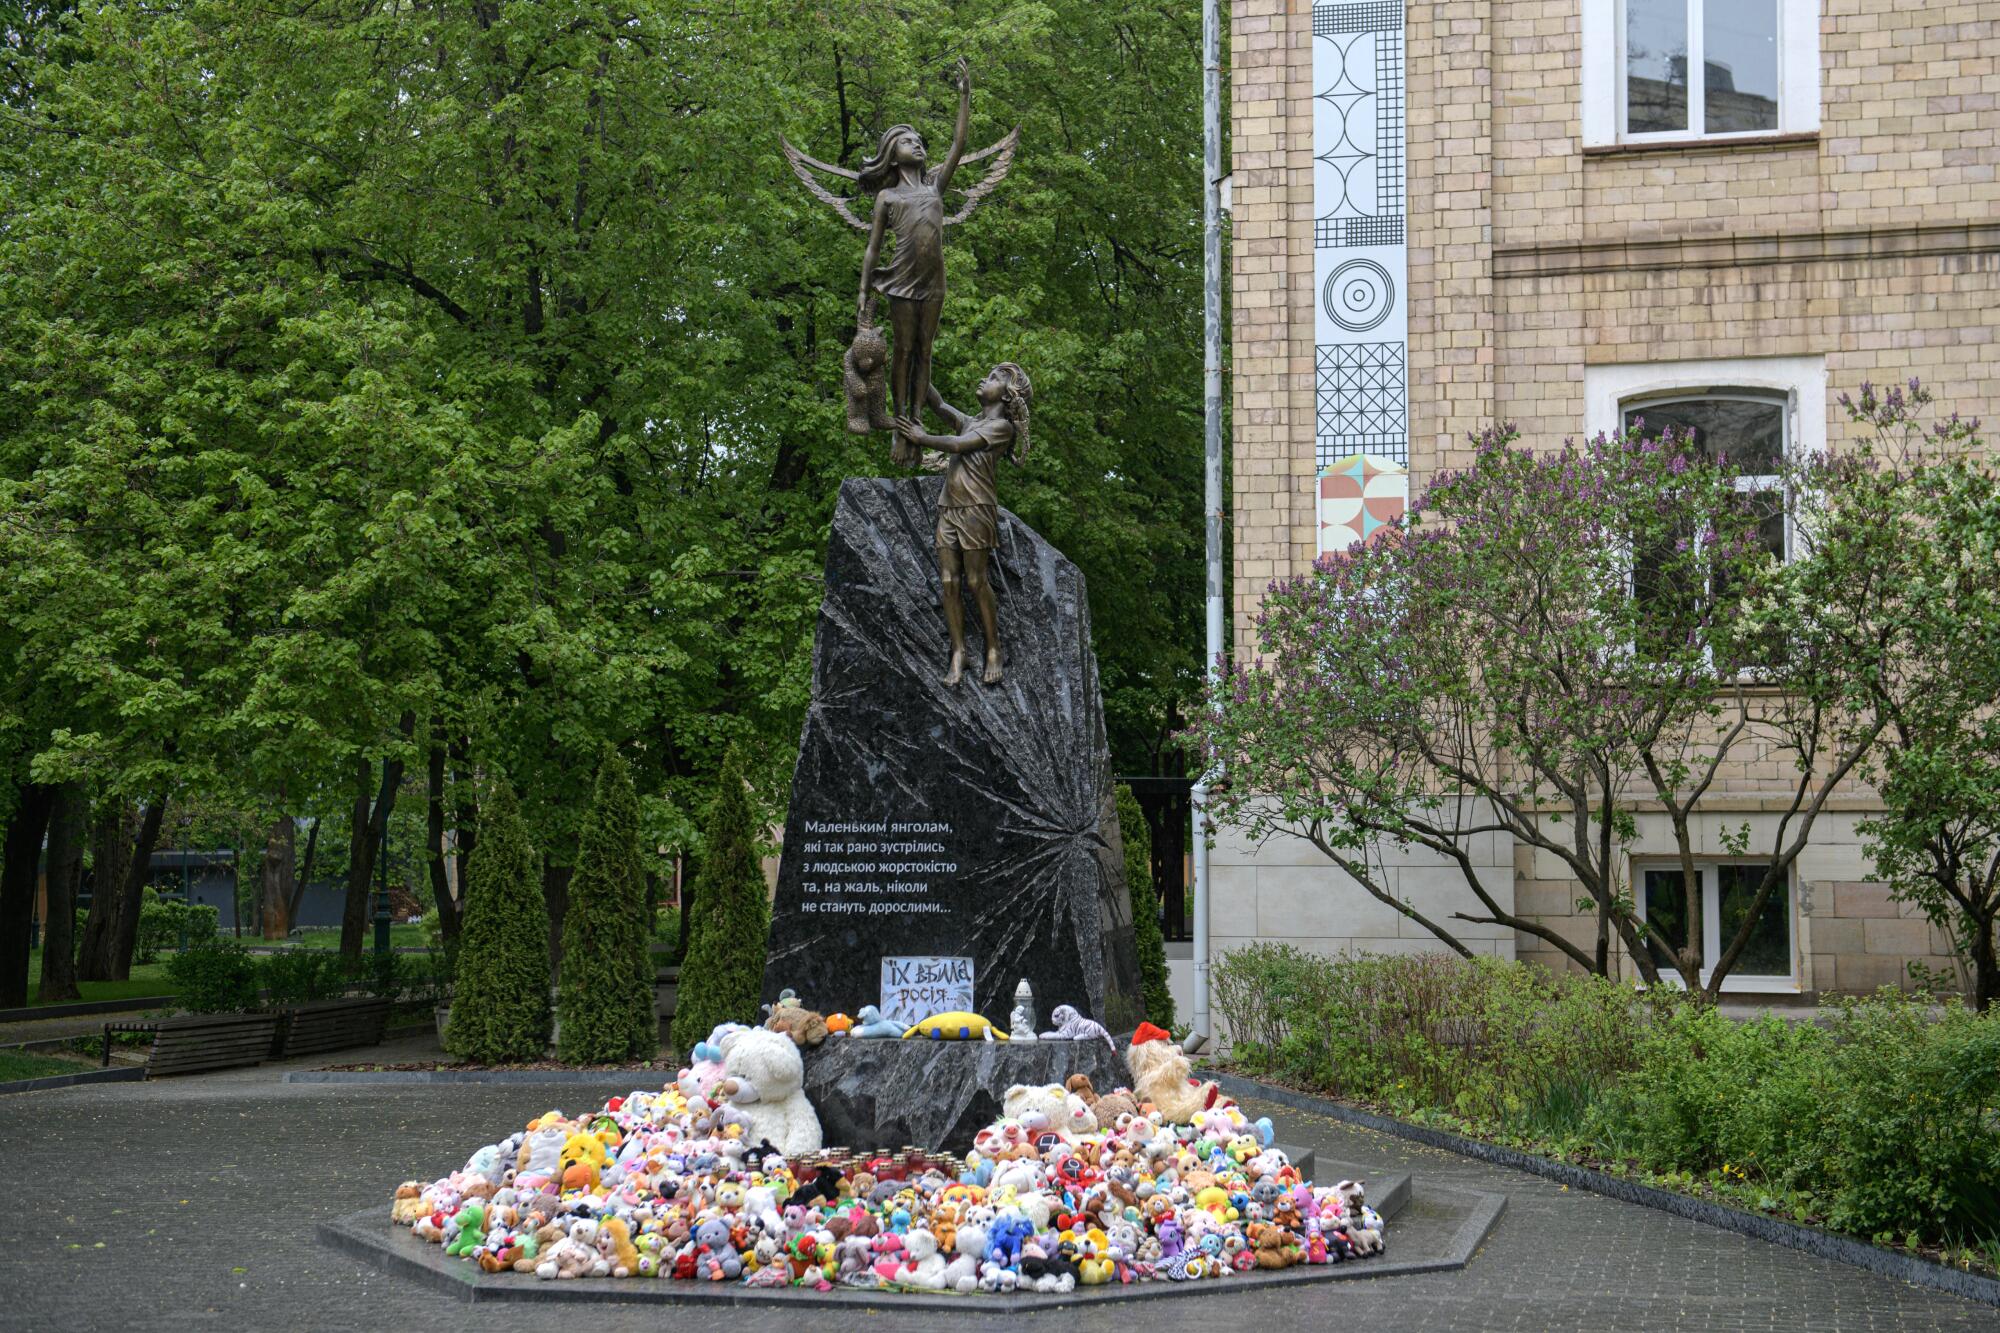 Teddy bears surround a monument in front of a building, near leafy trees